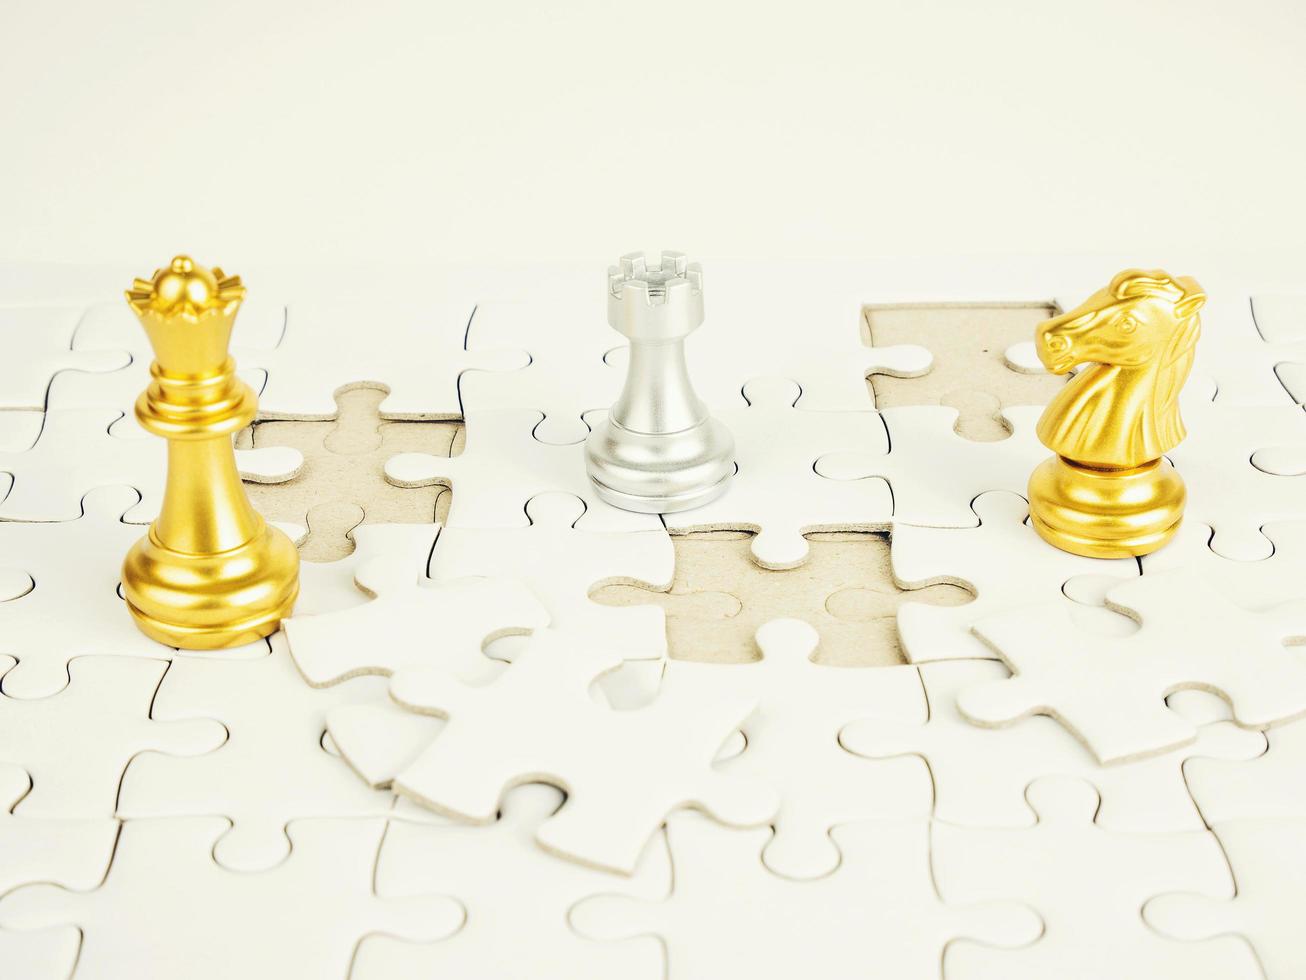 Glod and Sliver chess piece on jigsaw puzzle background, business concept photo